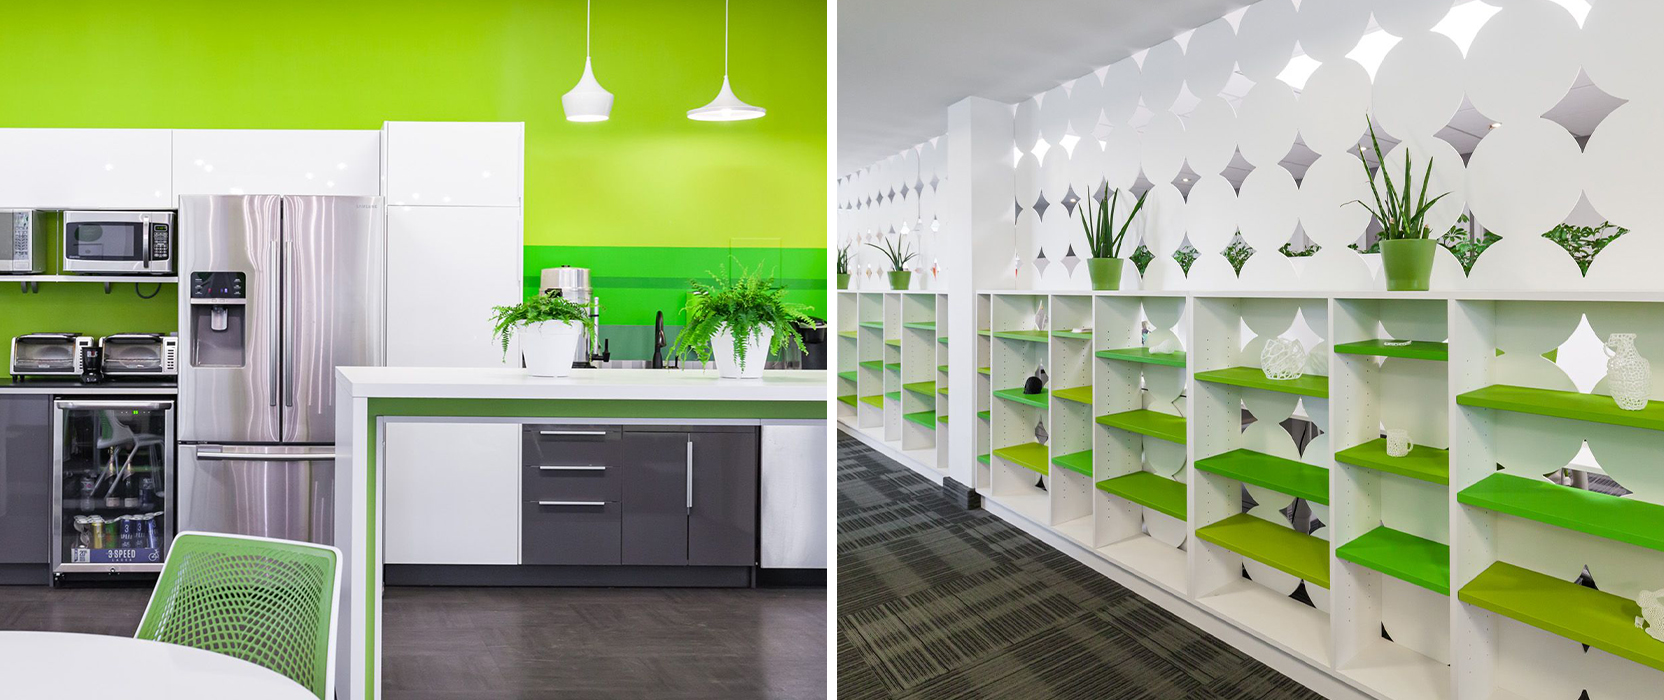 Vivid green walls and shelving in communal kitchen and display area with bright white cabinetry and stainless steel appliances.